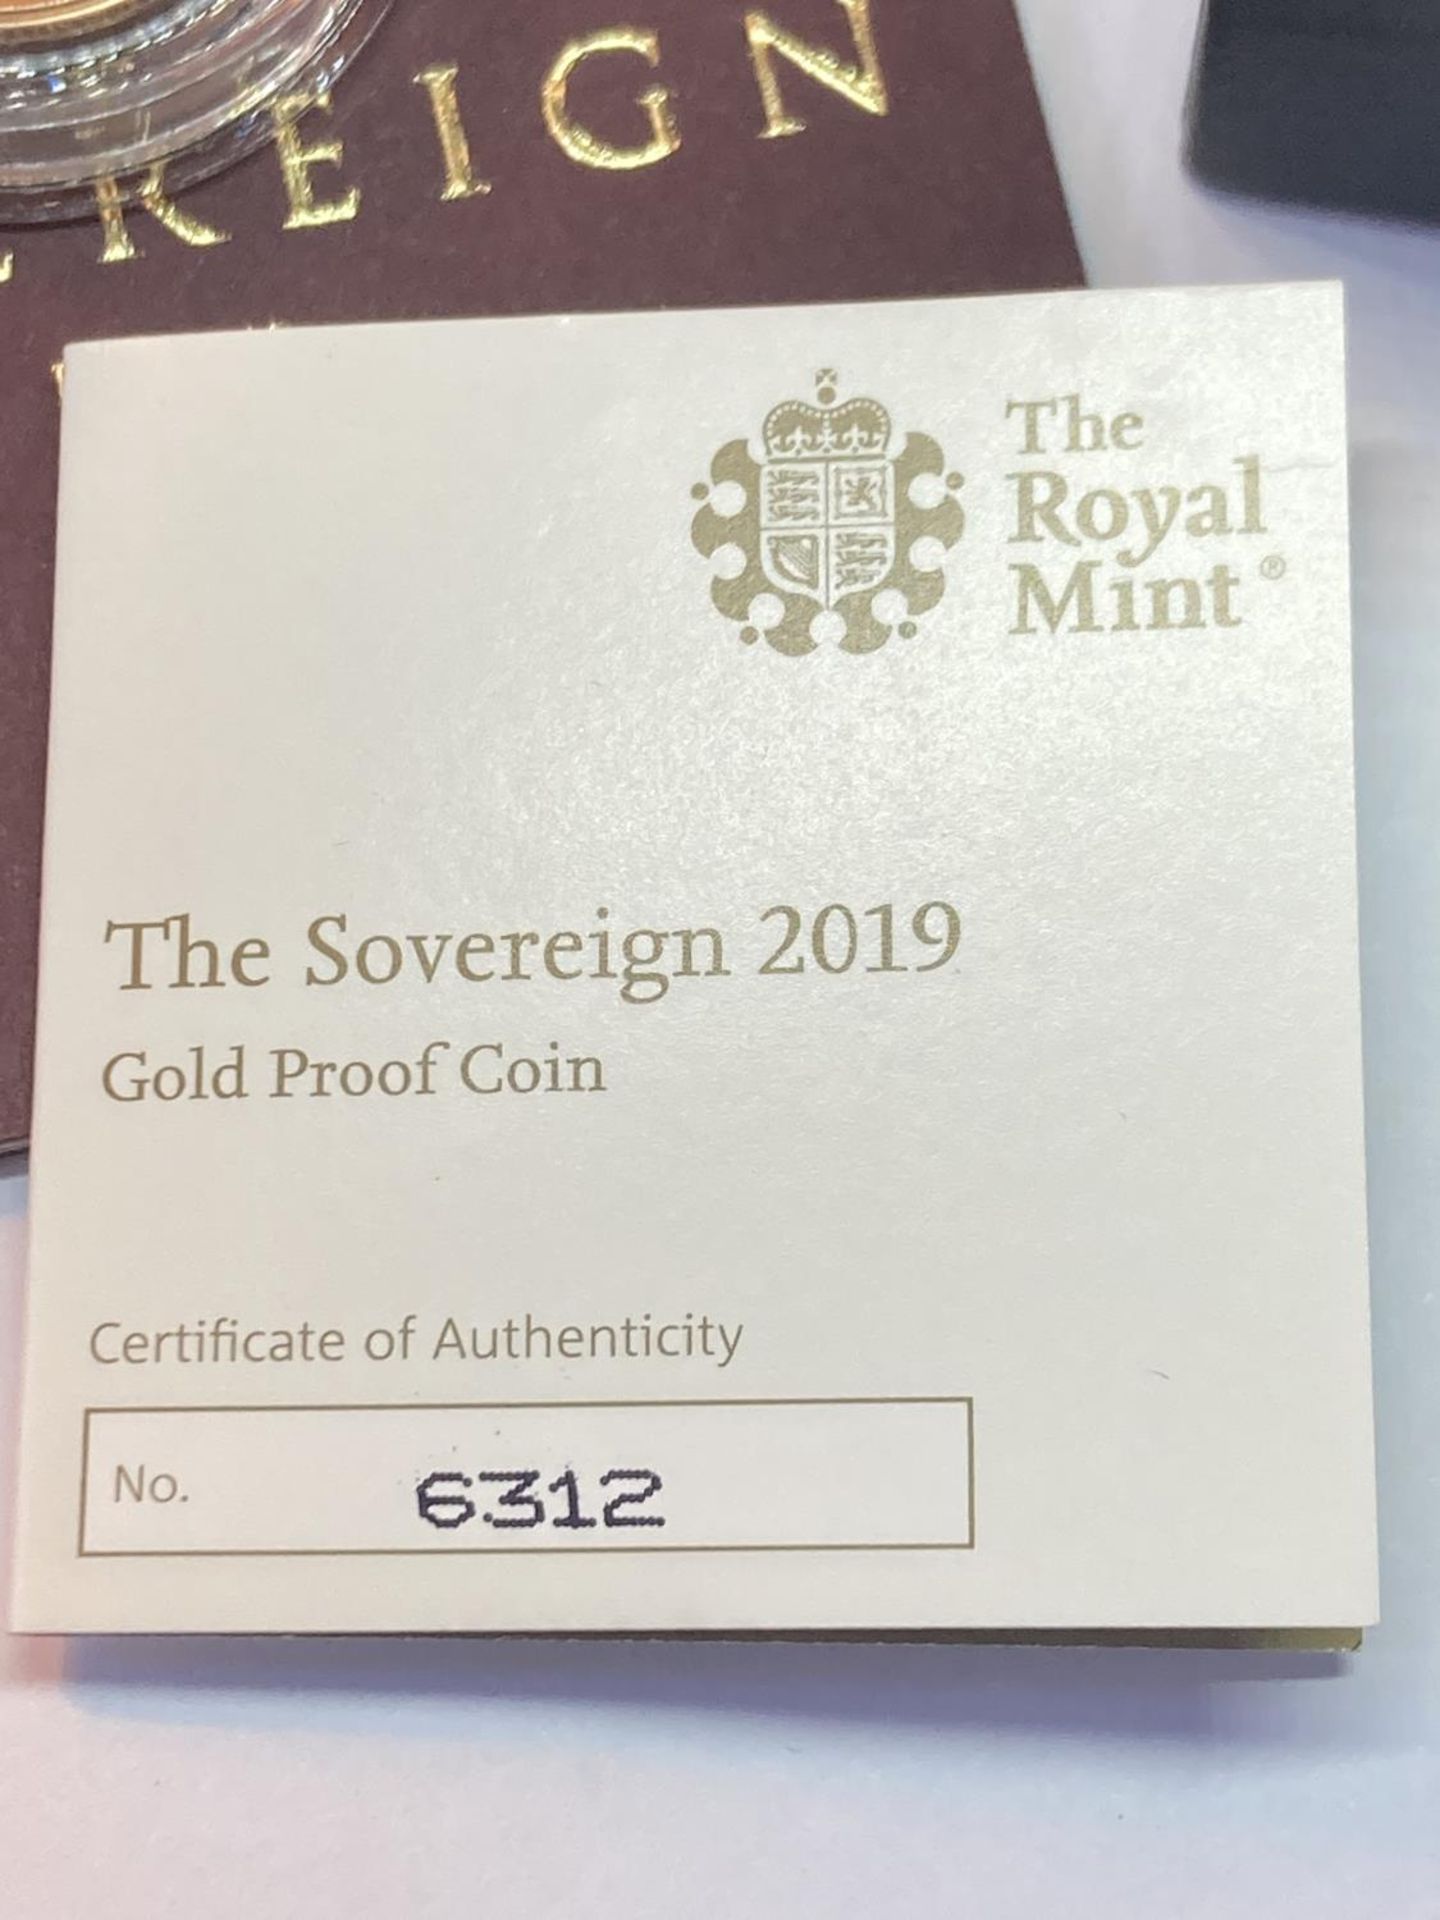 A 2019 THE SOVEREIGN GOLD PROOF LIMITED EDITION NUMBER 6,312 OF 9,500 IN A WOODEN BOXED CASE - Image 4 of 5